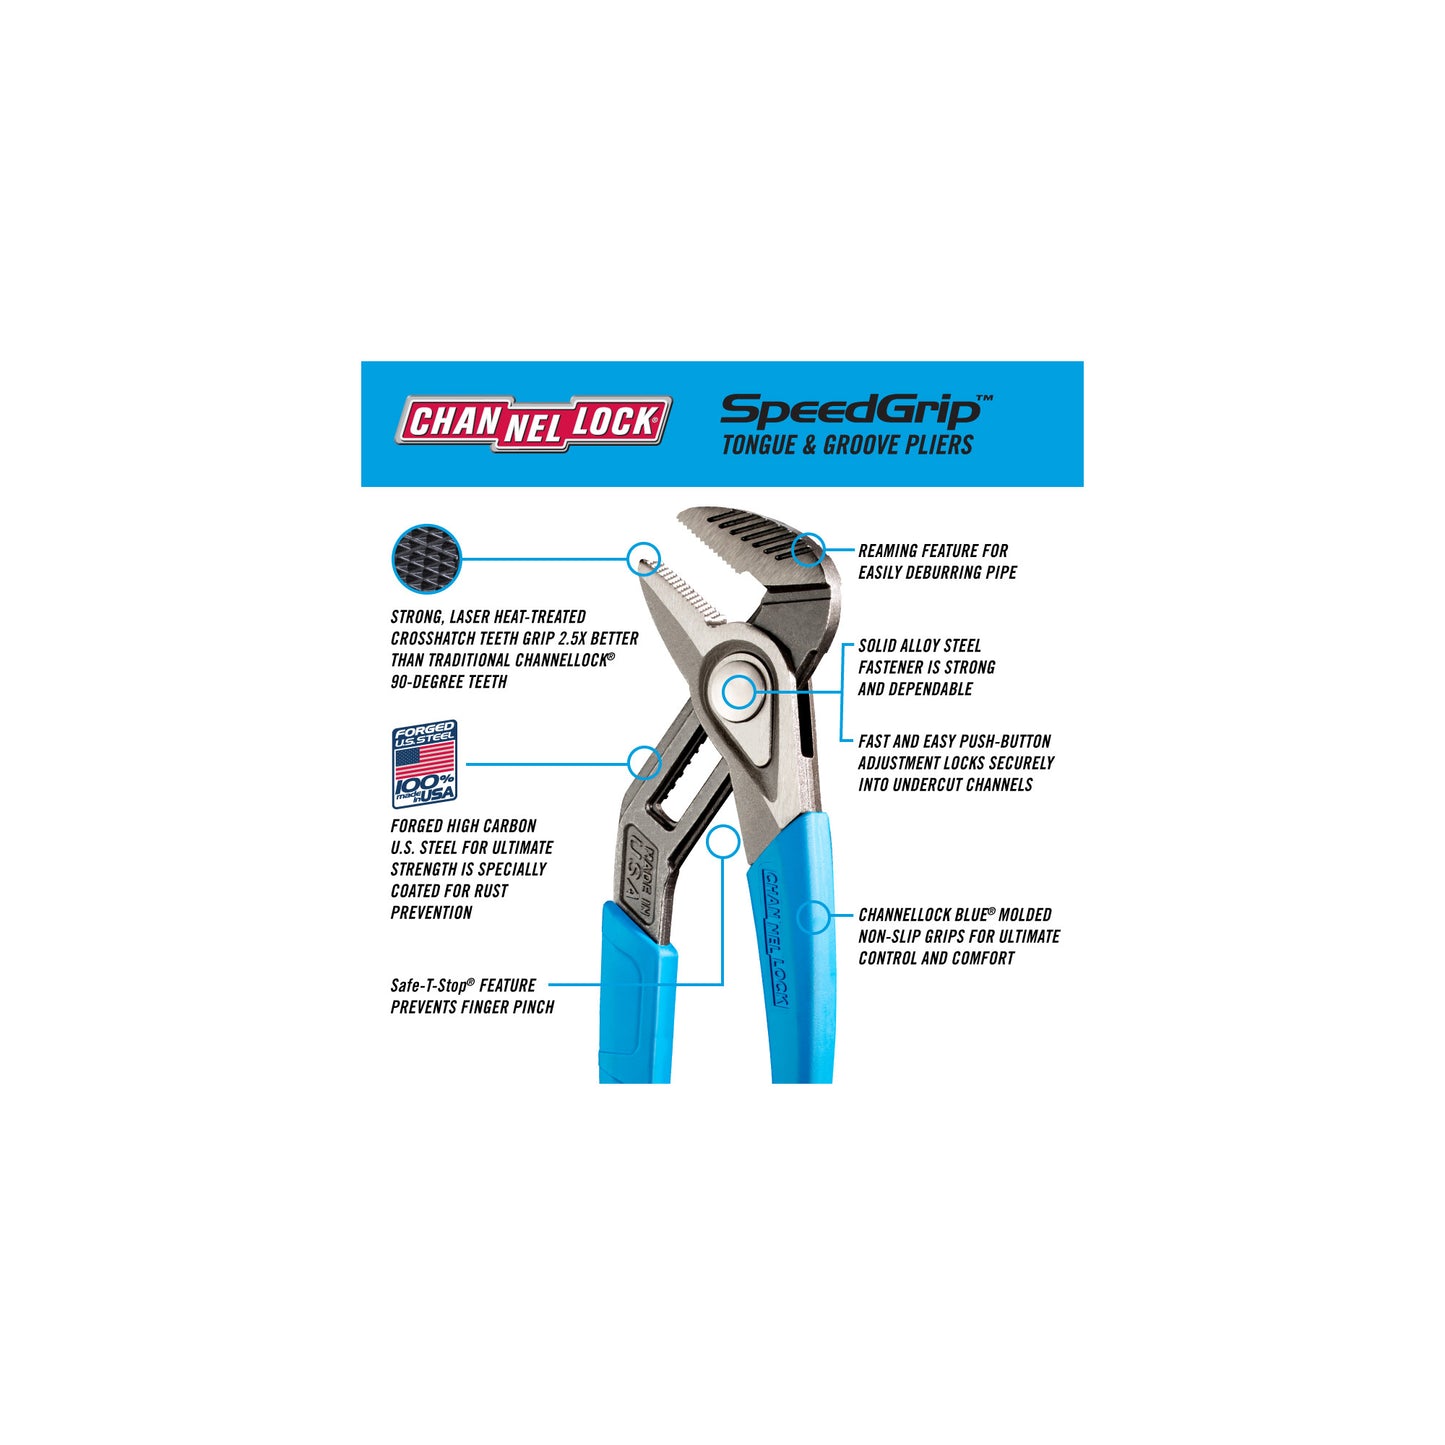 3pc SPEEDGRIP™ Tongue & Groove Pliers Set (GS-3XECP)